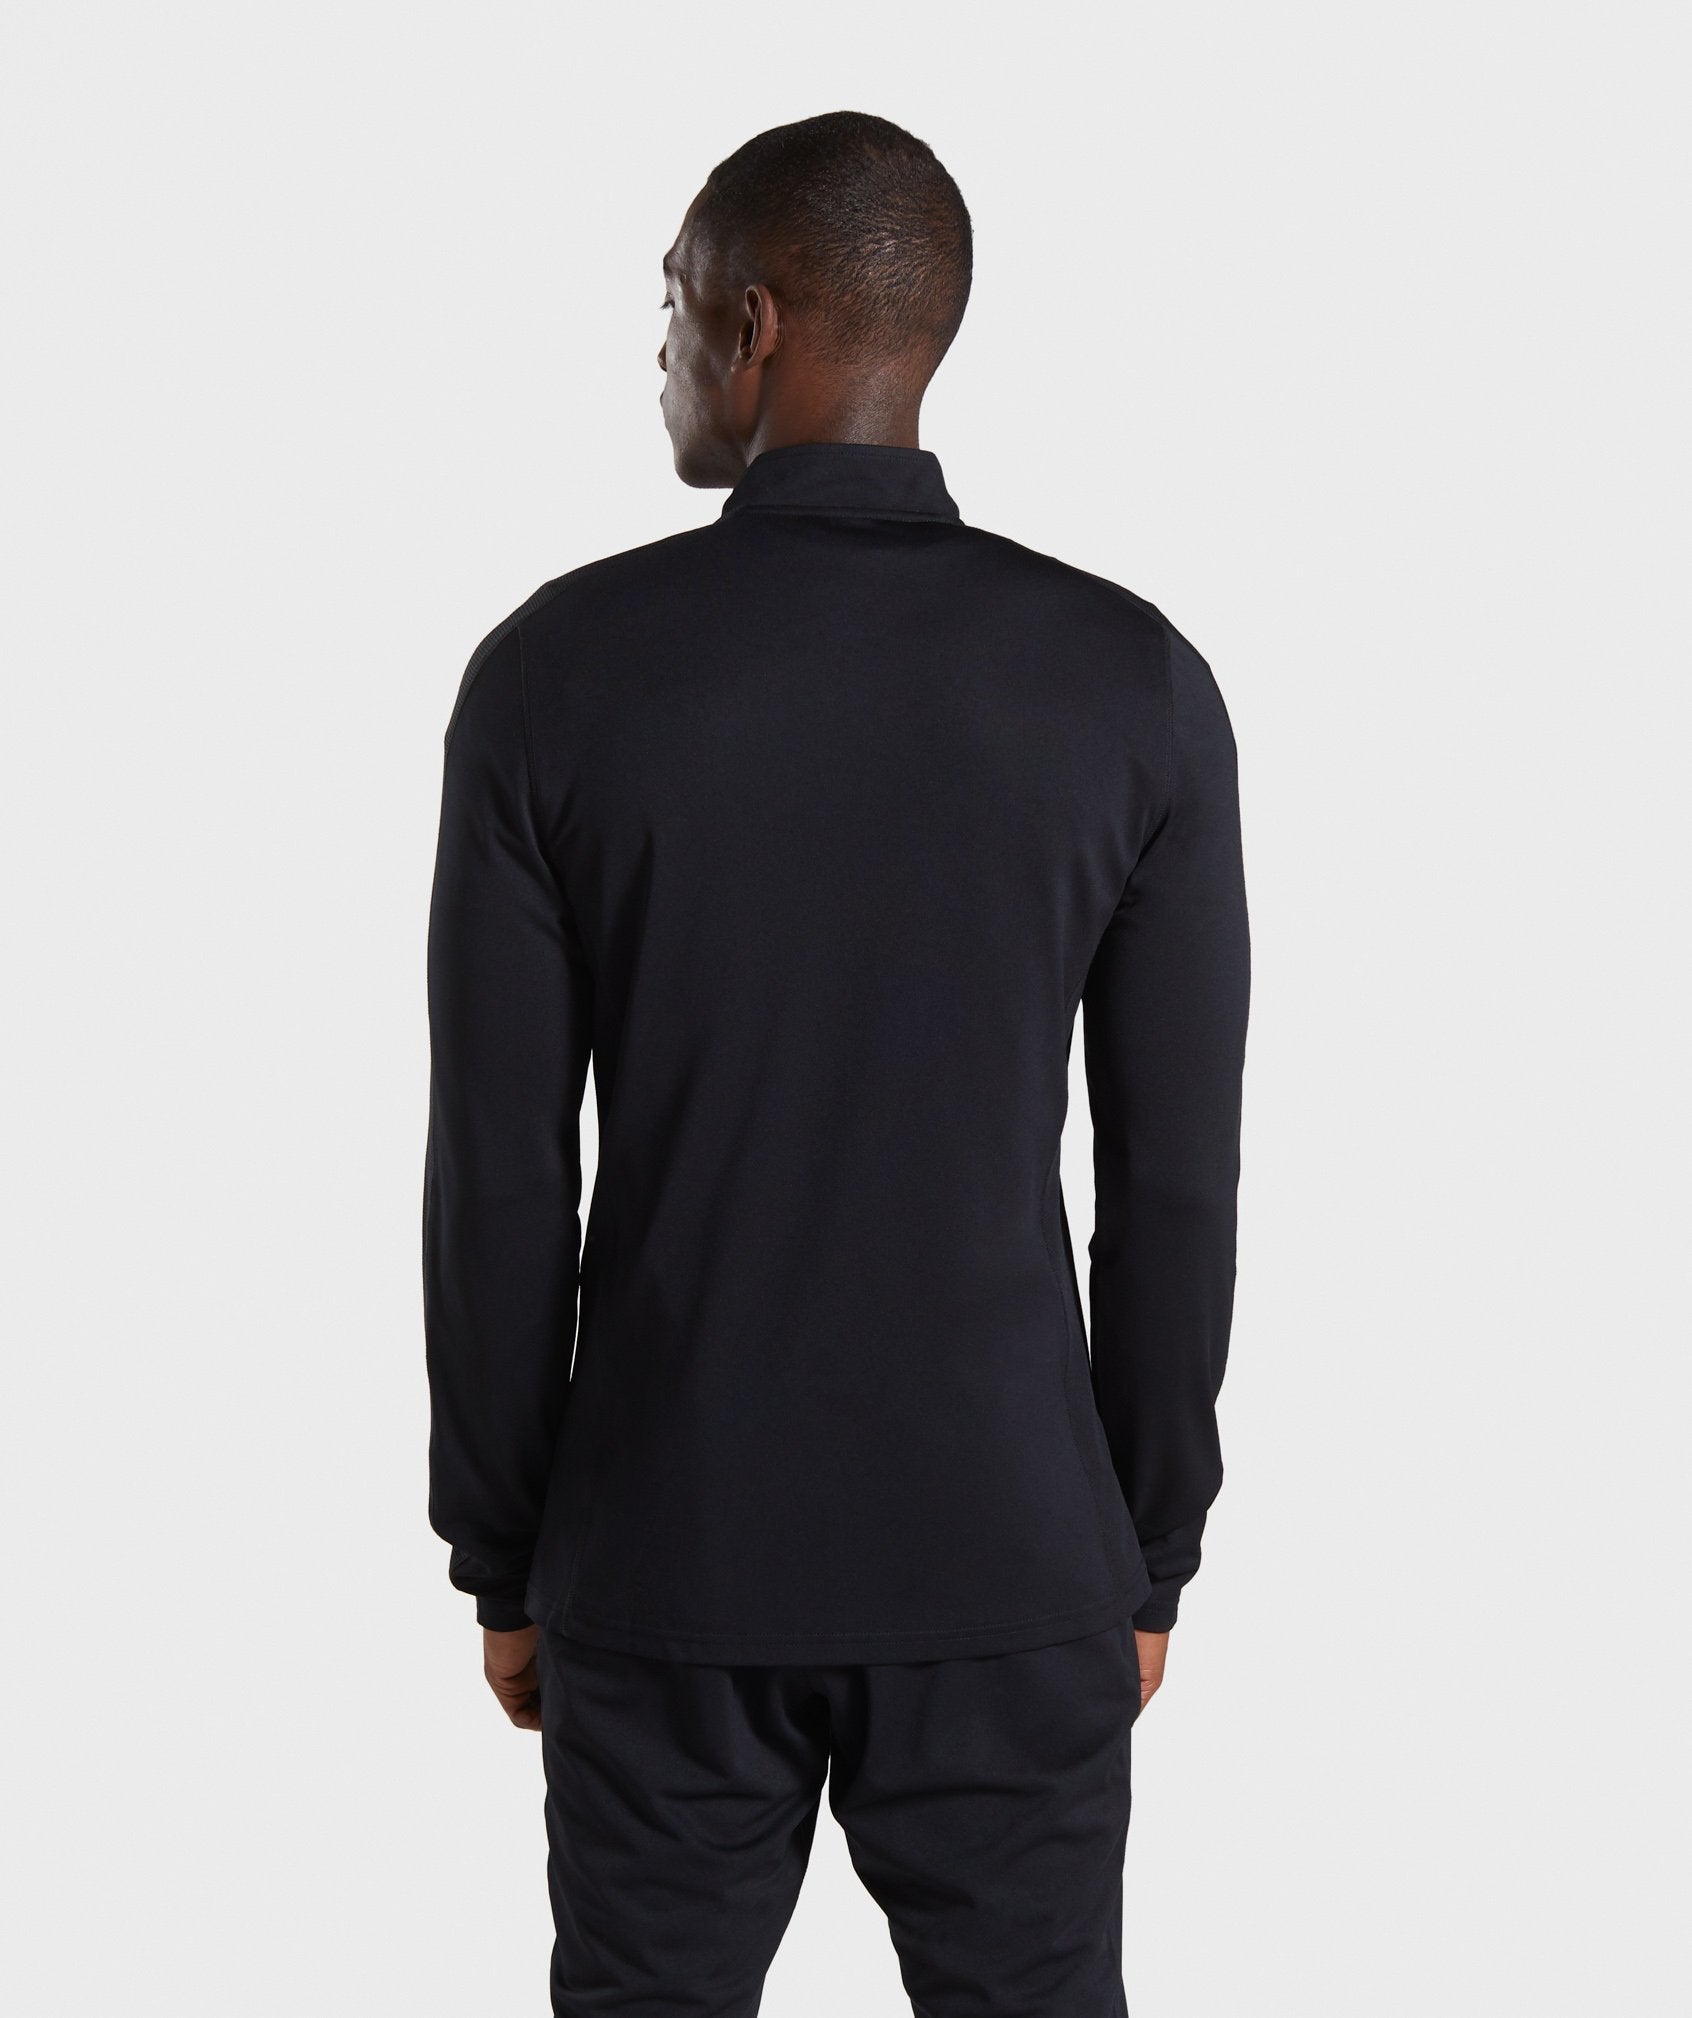 React Training Track Top in Black - view 2